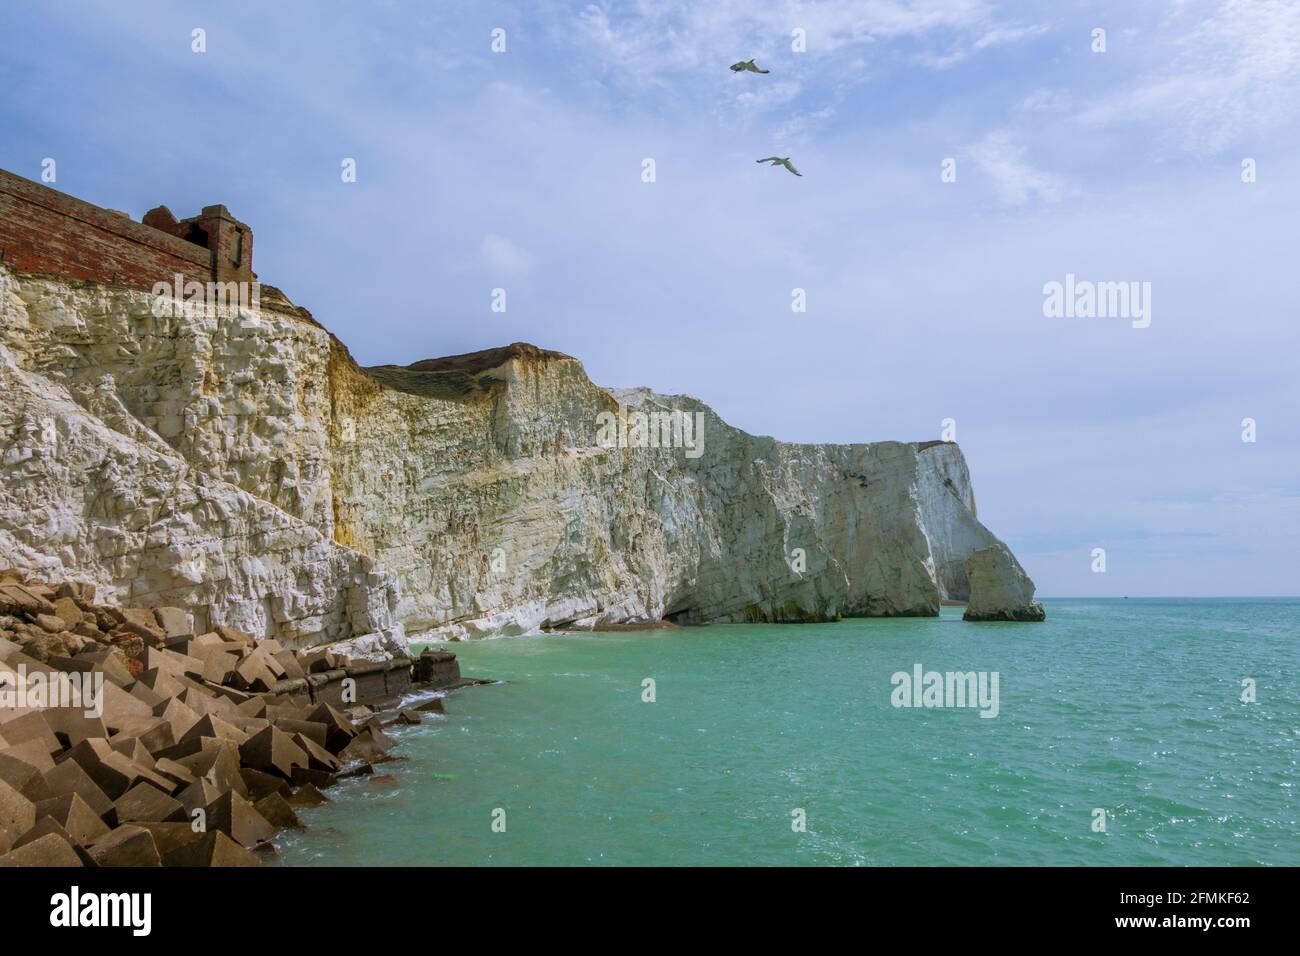 The chalk cliff face of Seaford Head in Seaford, Sussex UK an area that is susceptible to erosion and landslide. Stock Photo